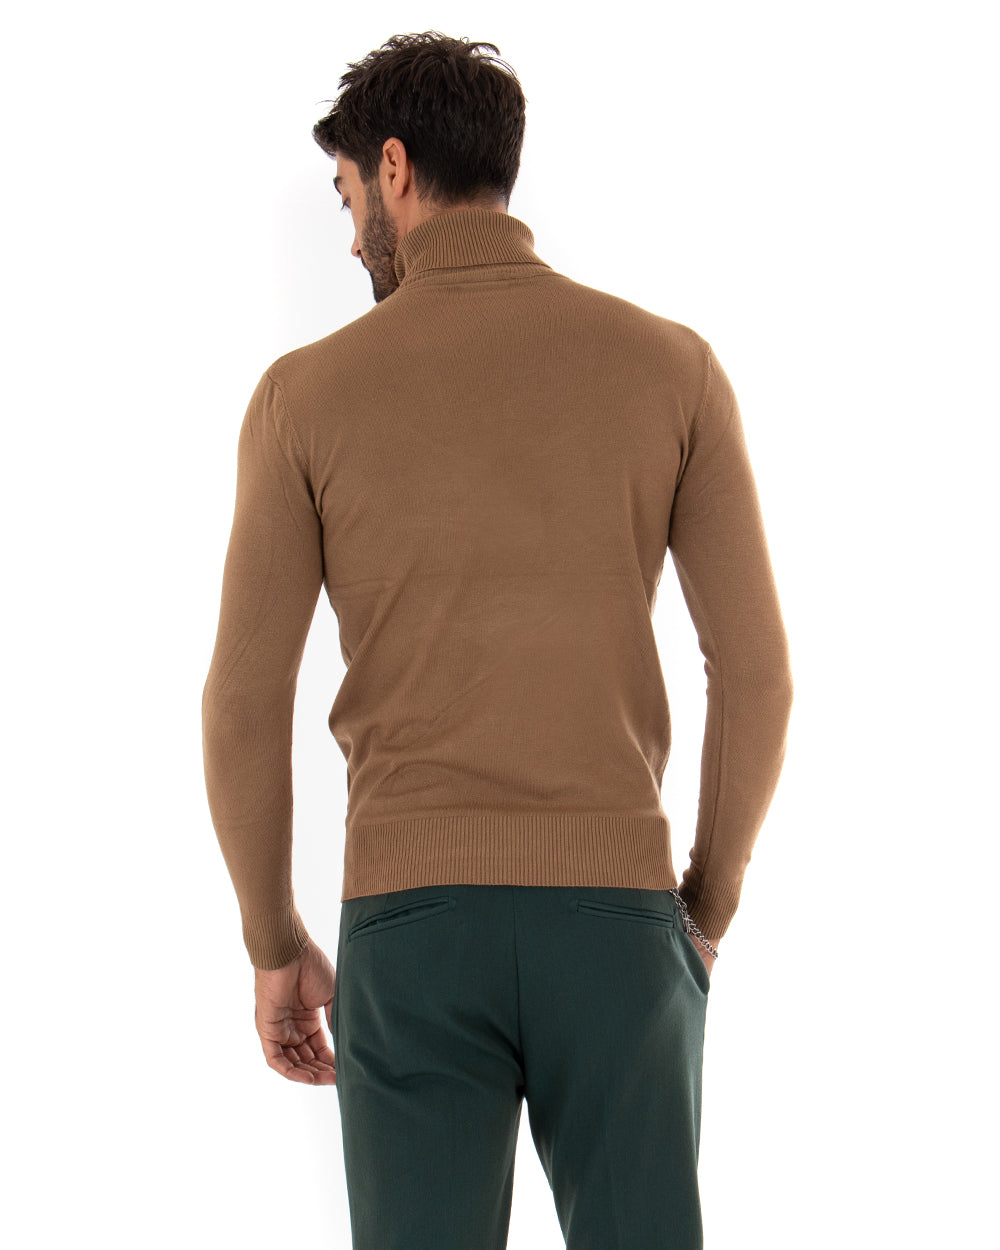 Men's Sweater Long Sleeves Elastic High Neck Solid Color Camel GIOSAL M2543A